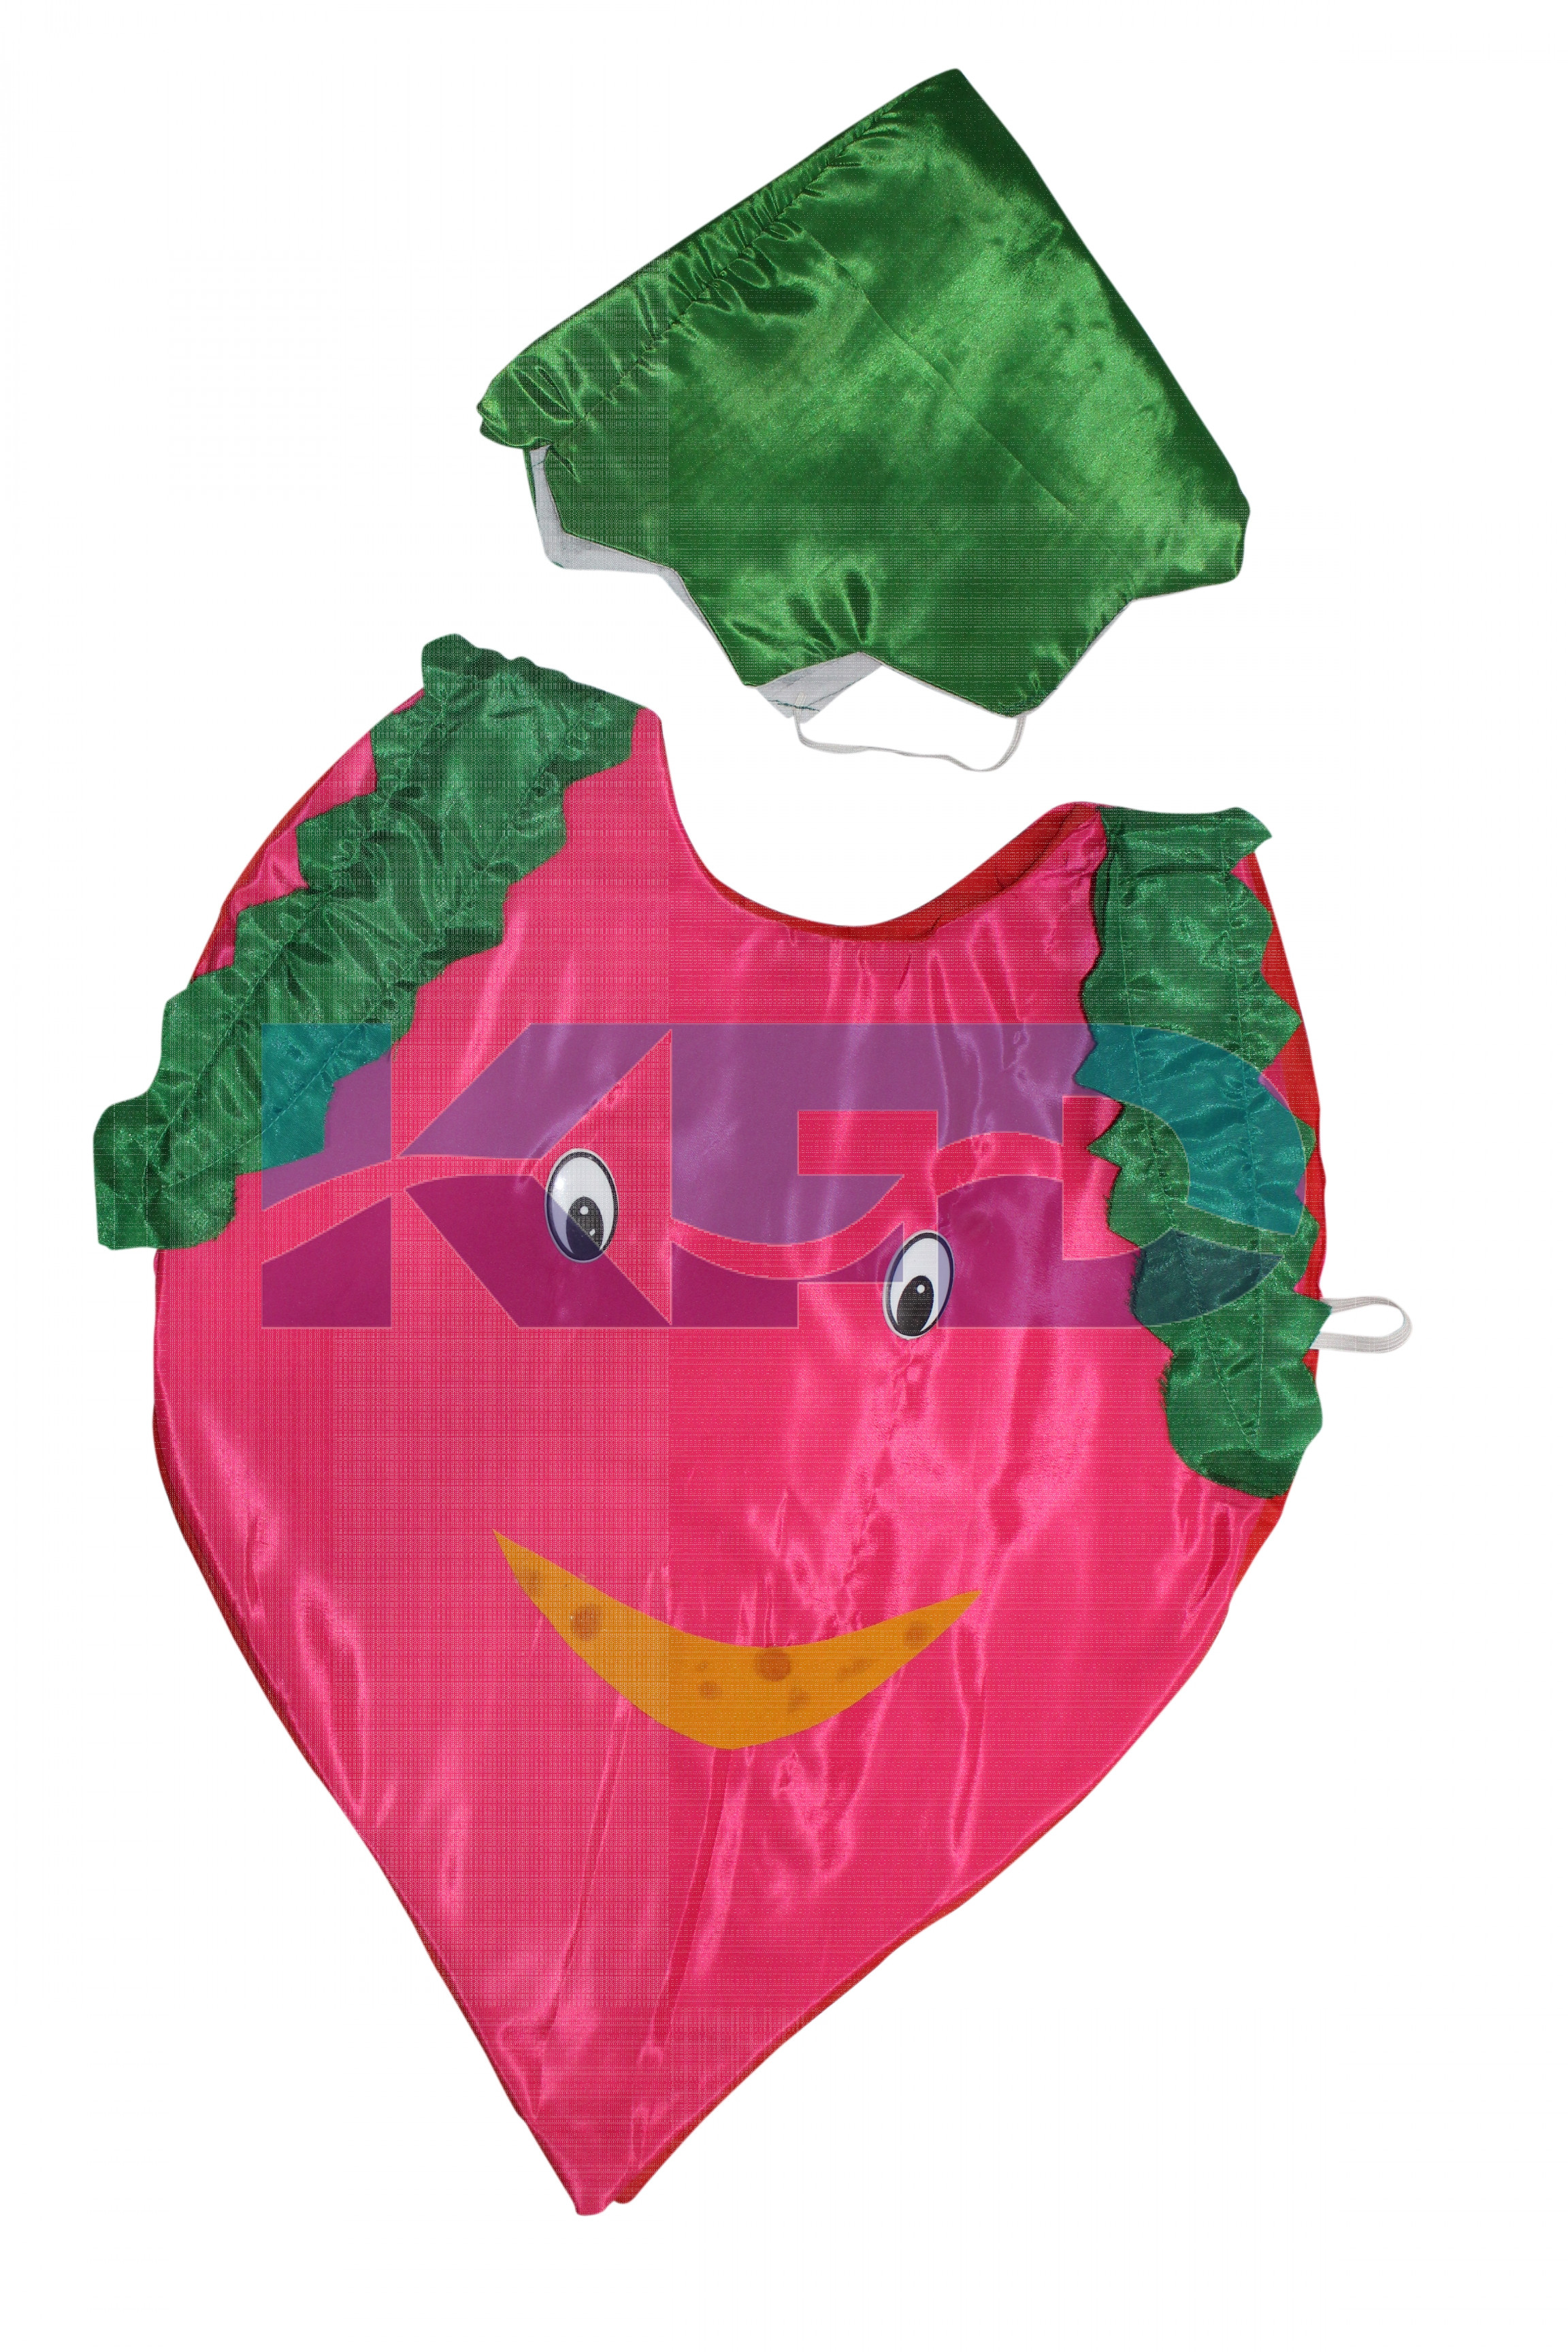  Onion Vegetables Costume only cutout with Cap for Annual function/Theme Party/Competition/Stage Shows/Birthday Party Dress